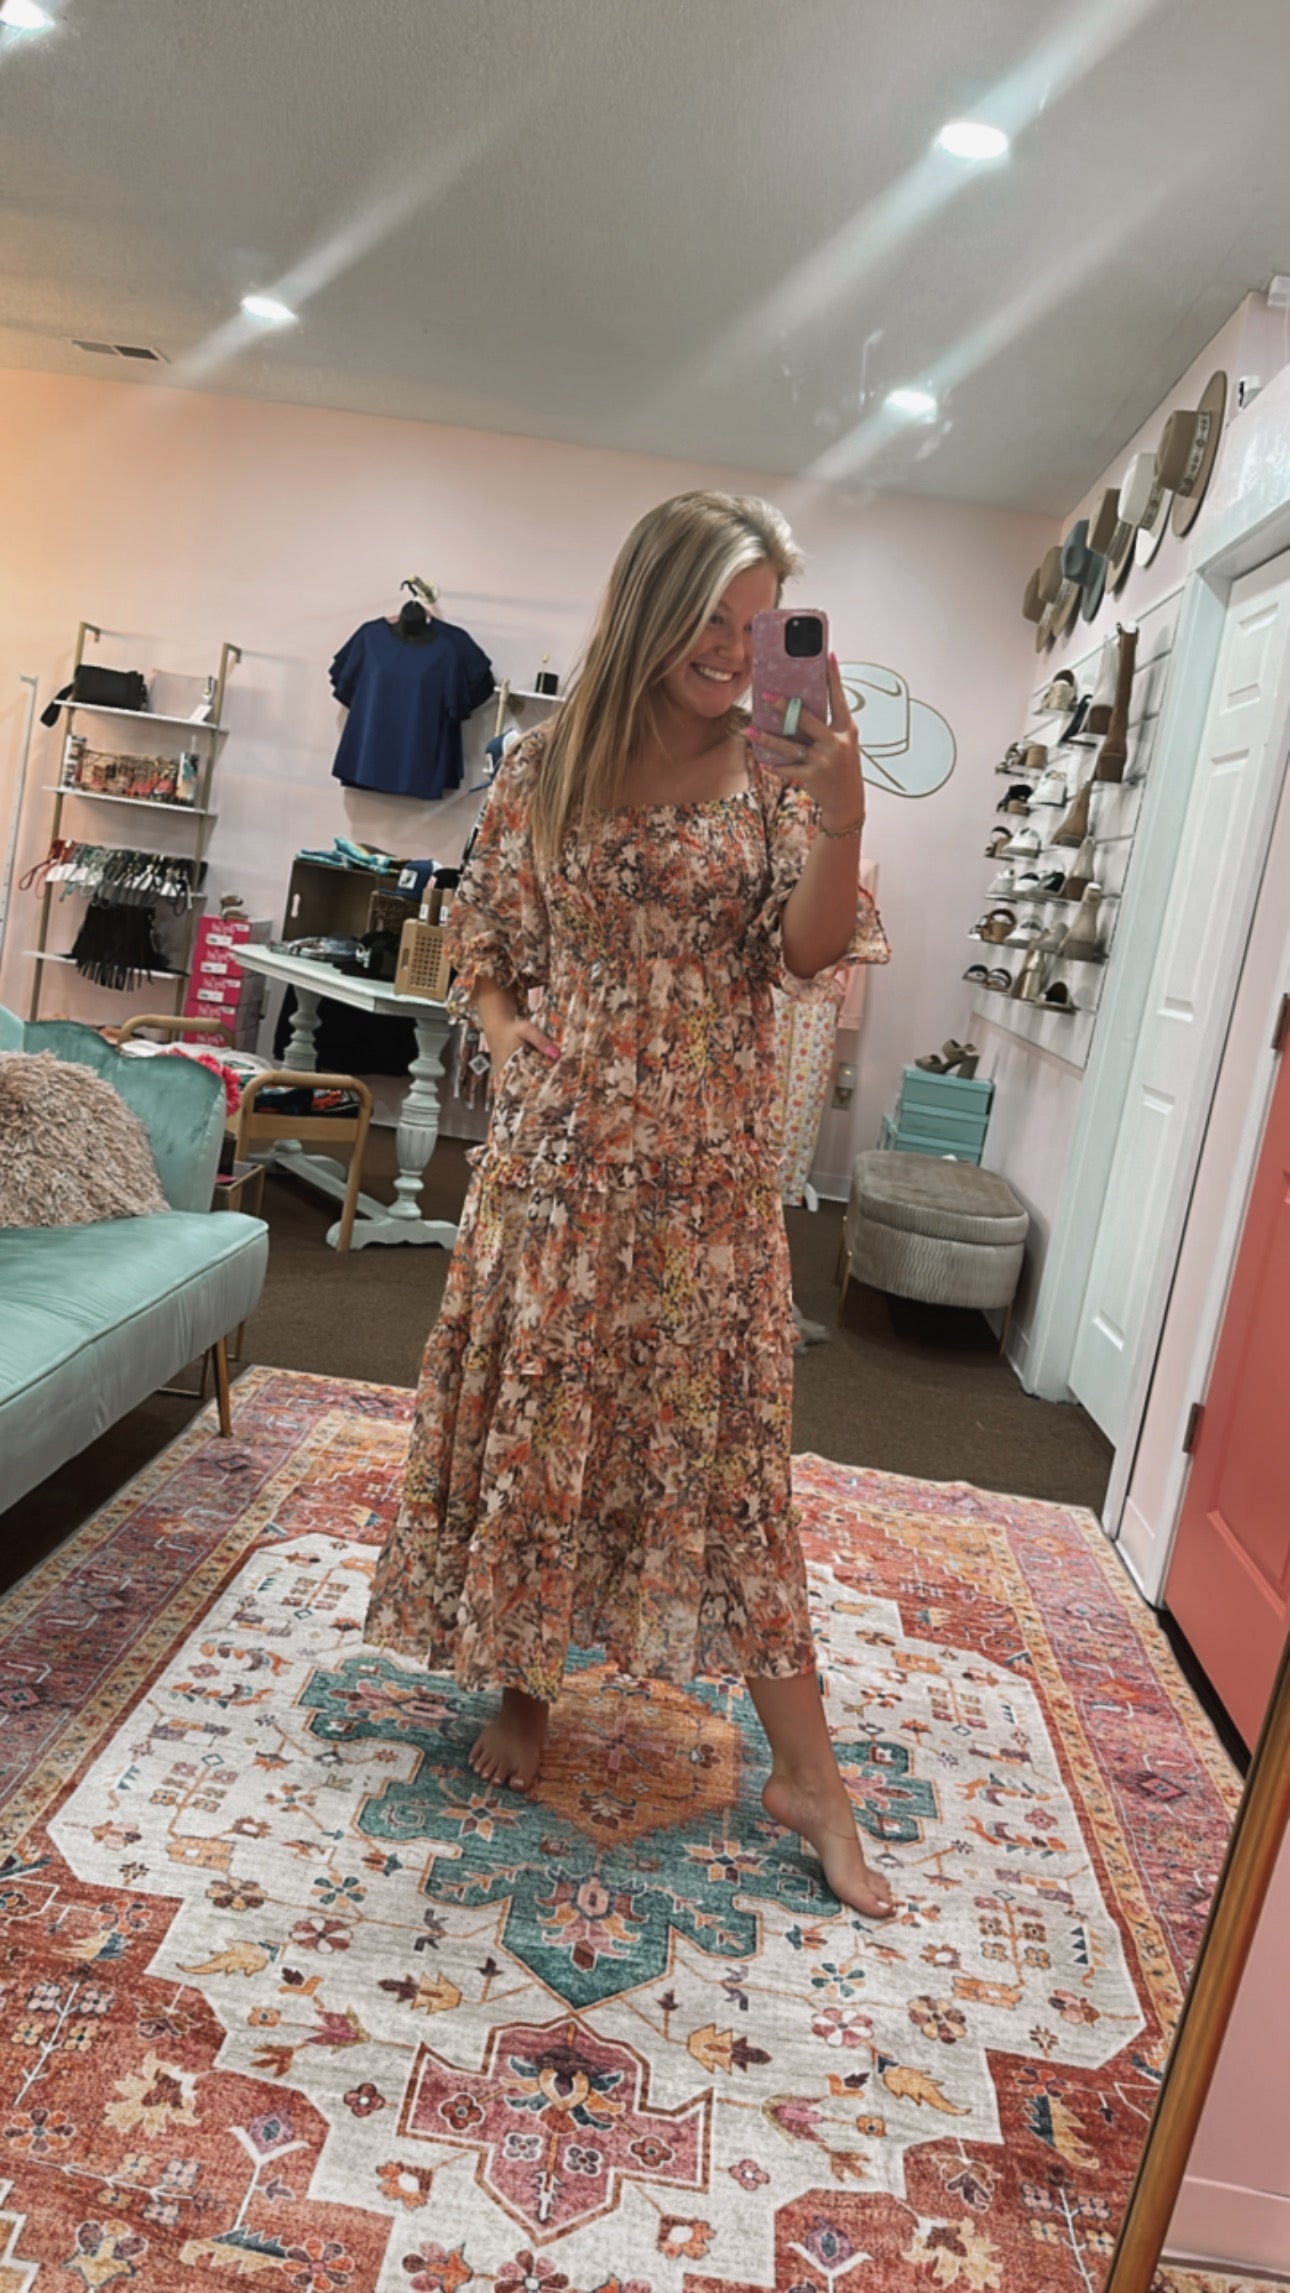 Willow Floral Smocked Midi